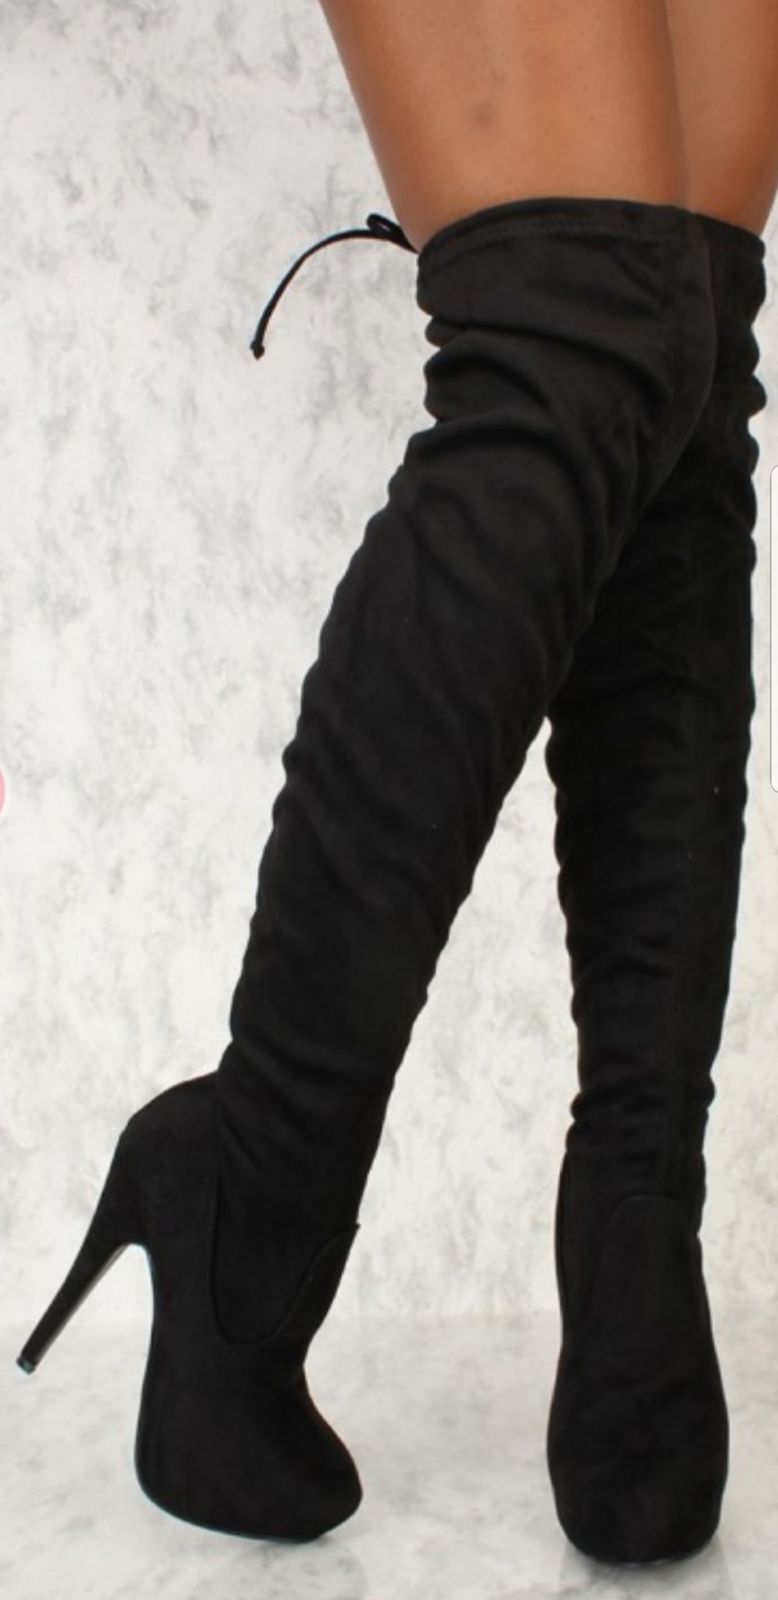 Black suede thigh high boots